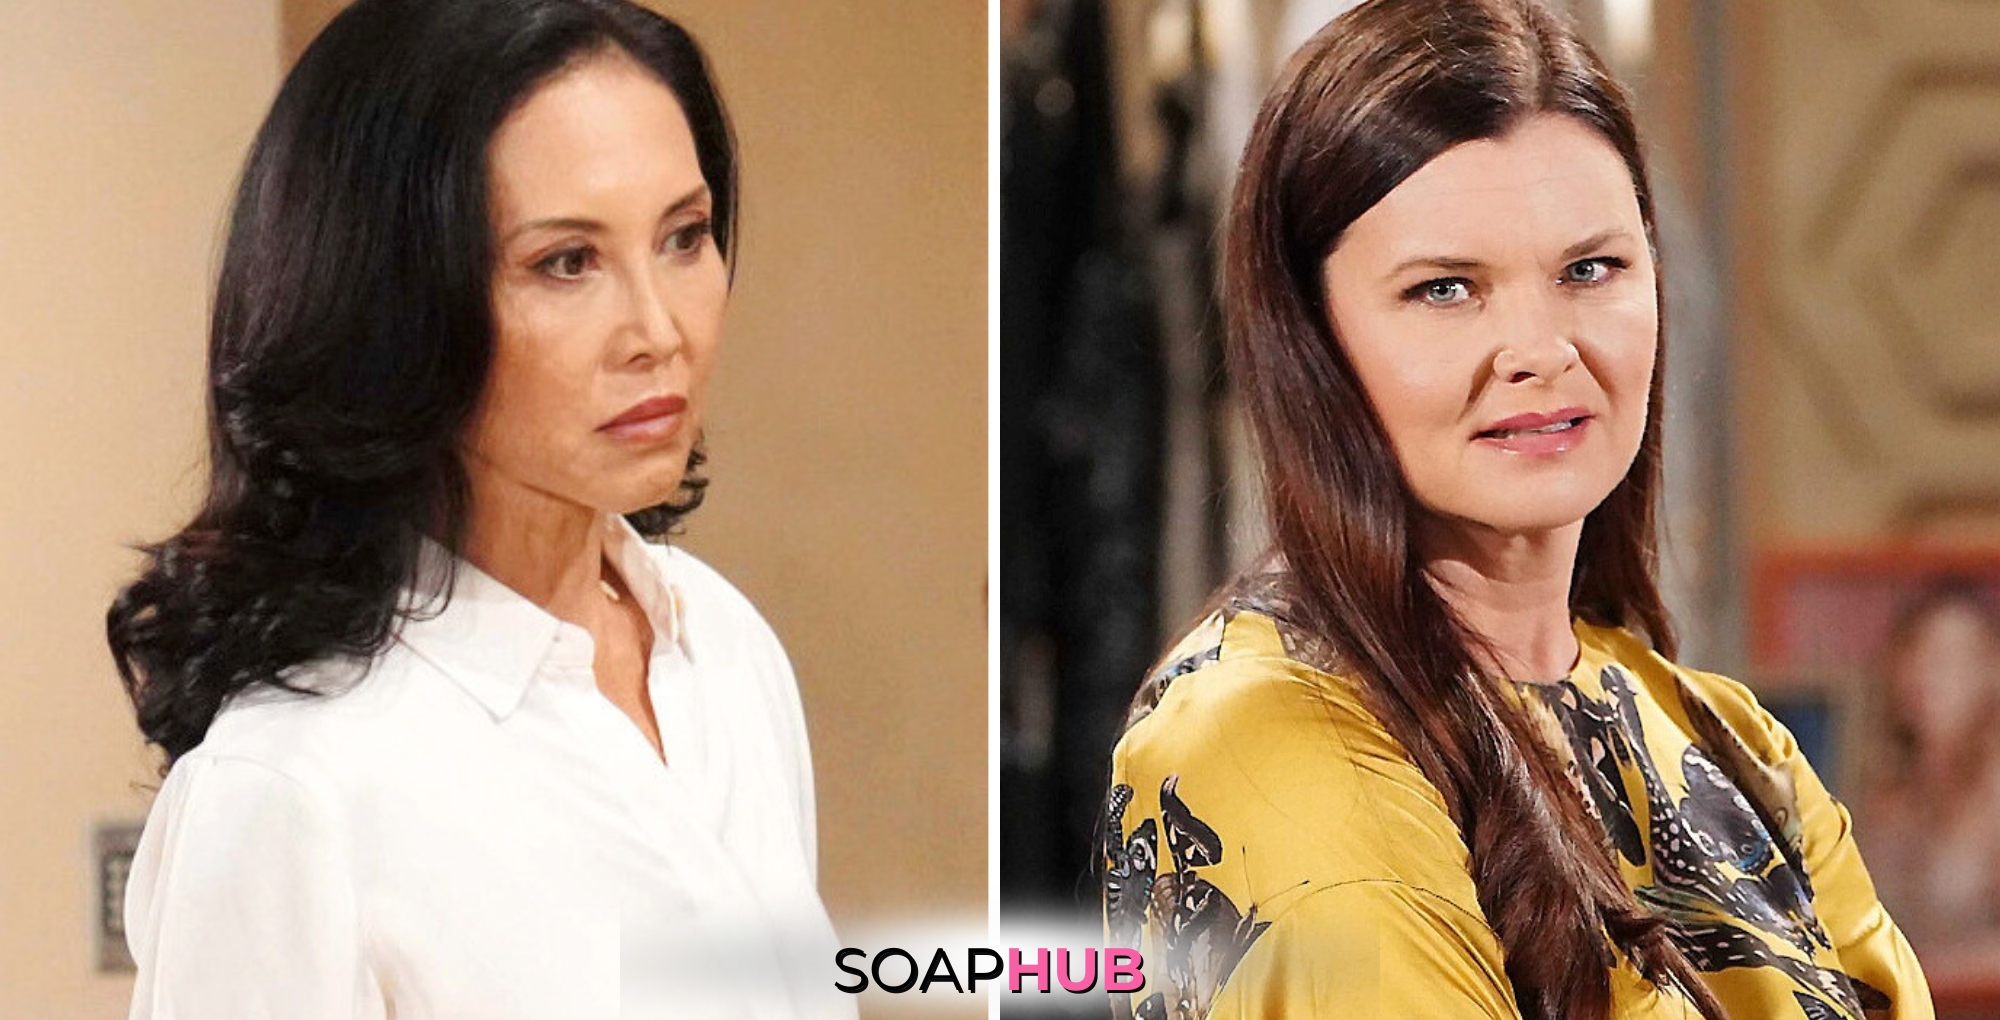 Bold and the Beautiful Spoilers for Thursday, June 5, Episode 9288 Feature Li and Katie with the Soap Hub Logo Across the Bottom.